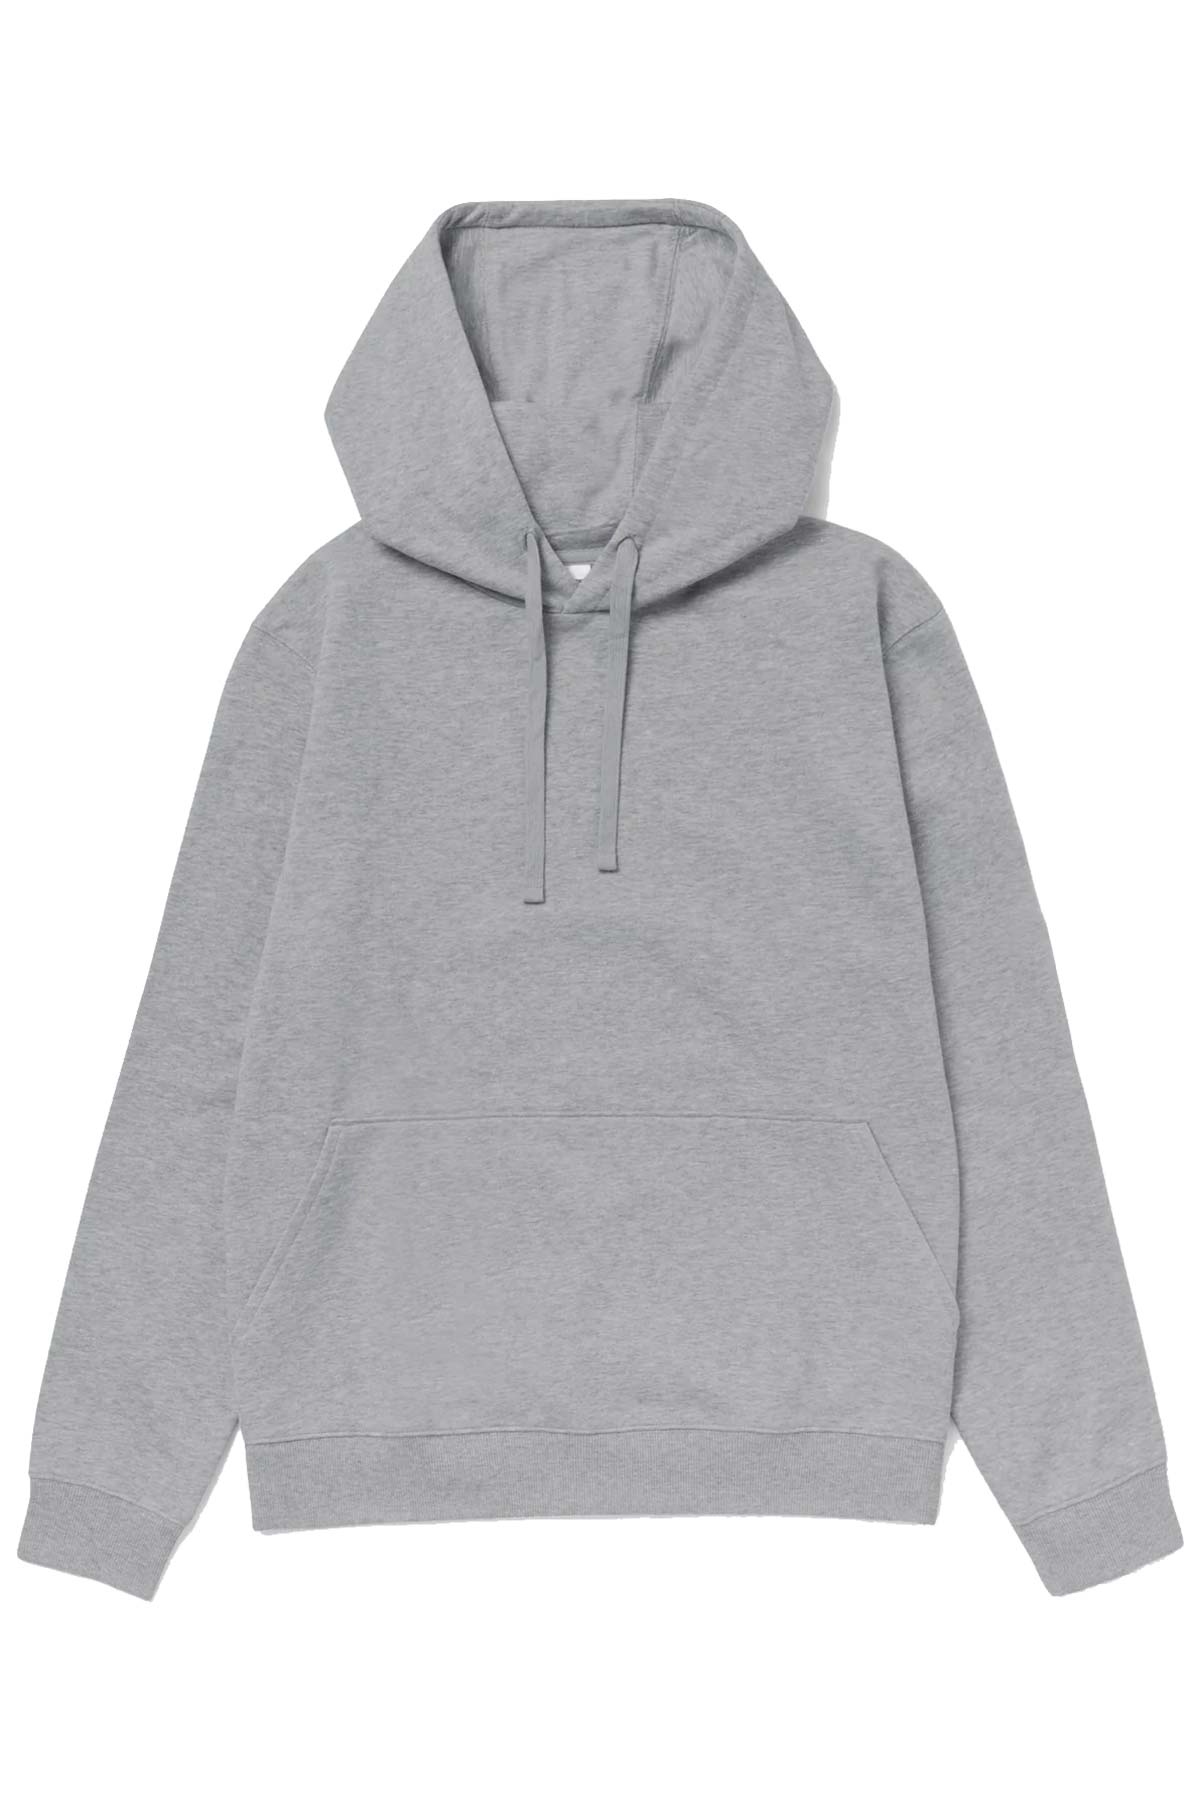 Richer Poorer - Recycled Pullover Hoodie - Heather Grey - Flatlay